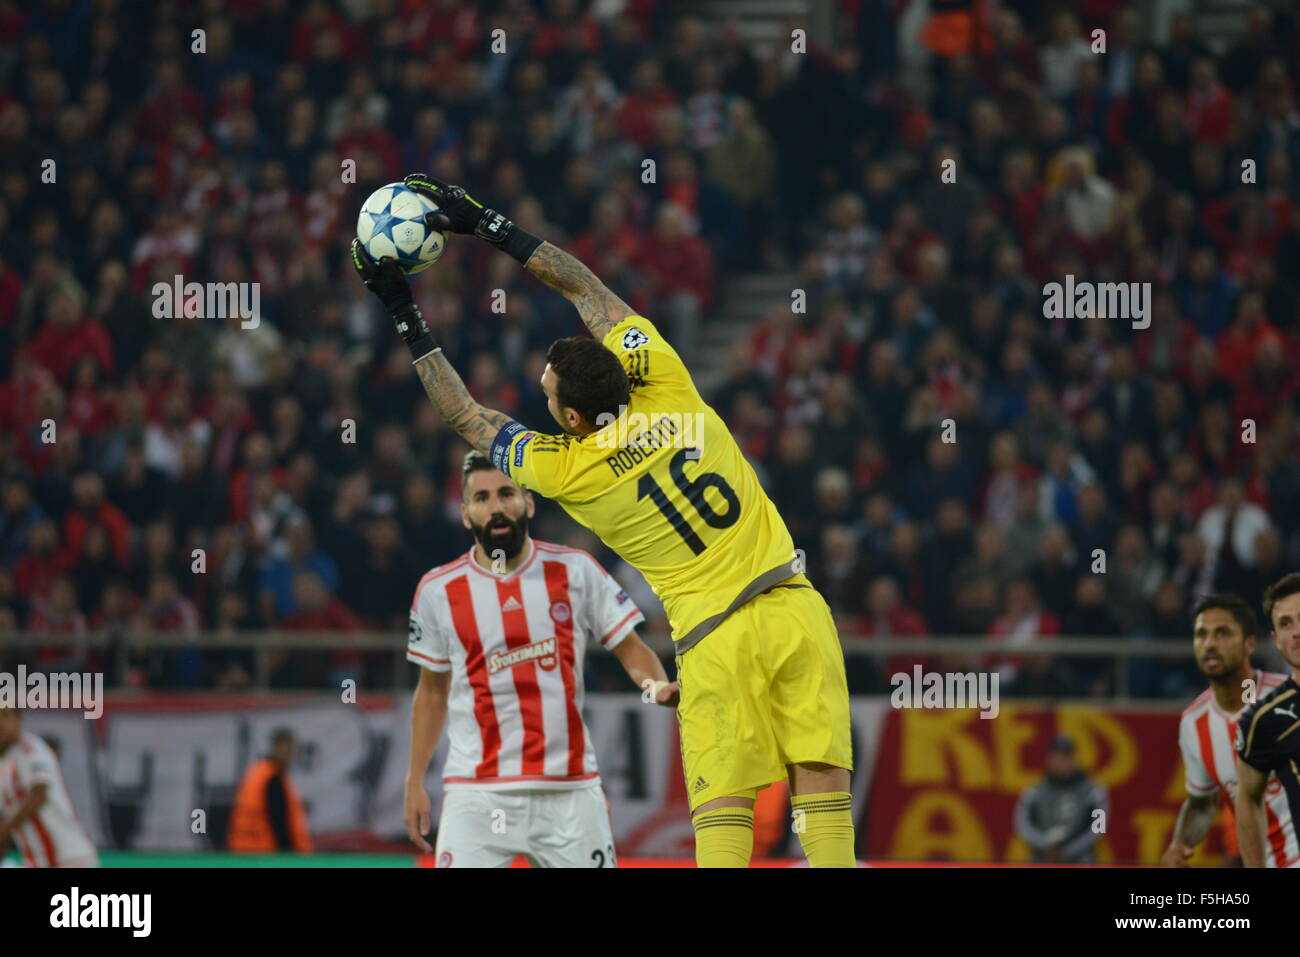 Piraeus, Greece. 05th Nov, 2015. Goalkeeper Roberto of Olympiacos is catching the ball after an attempt of the players of Dynamo Zagreb. © Dimitrios Karvountzis/Pacific Press/Alamy Live News Stock Photo